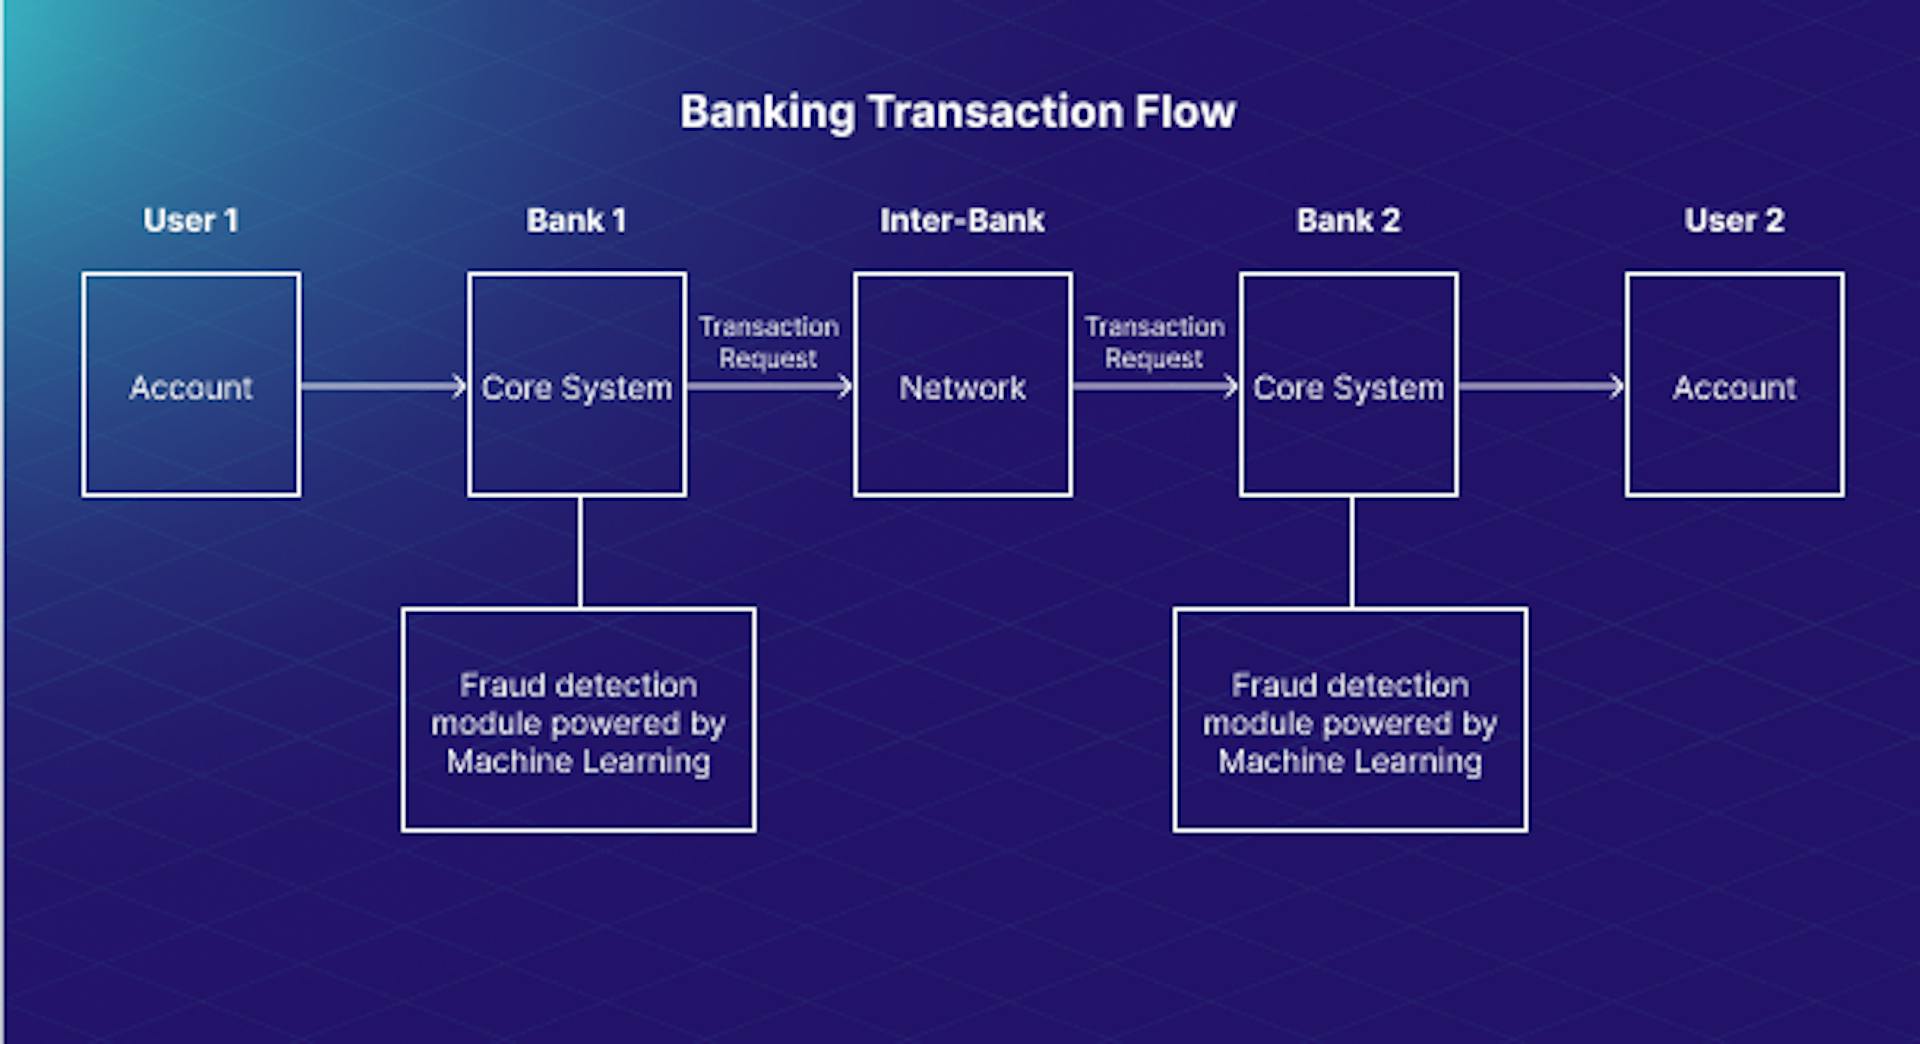 Figure 2. Simplified transaction flow in banking 